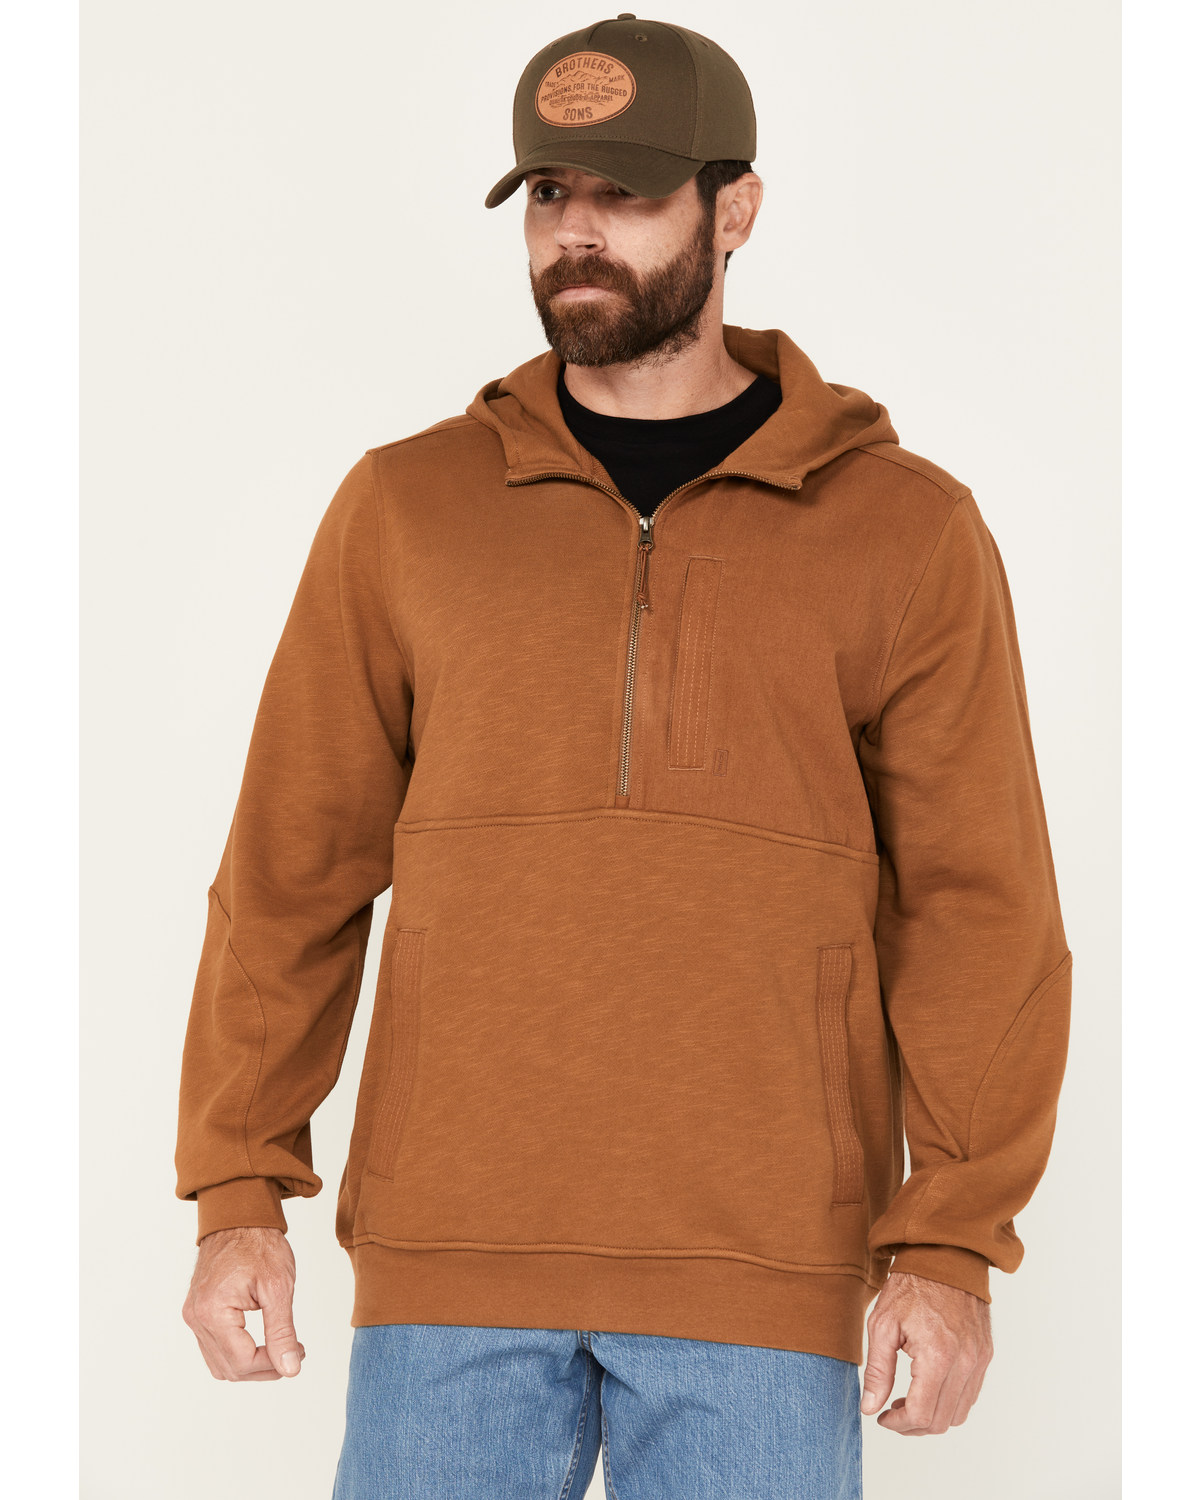 Brothers and Sons Men's Hardin French Terry Hooded Zip Sweatshirt